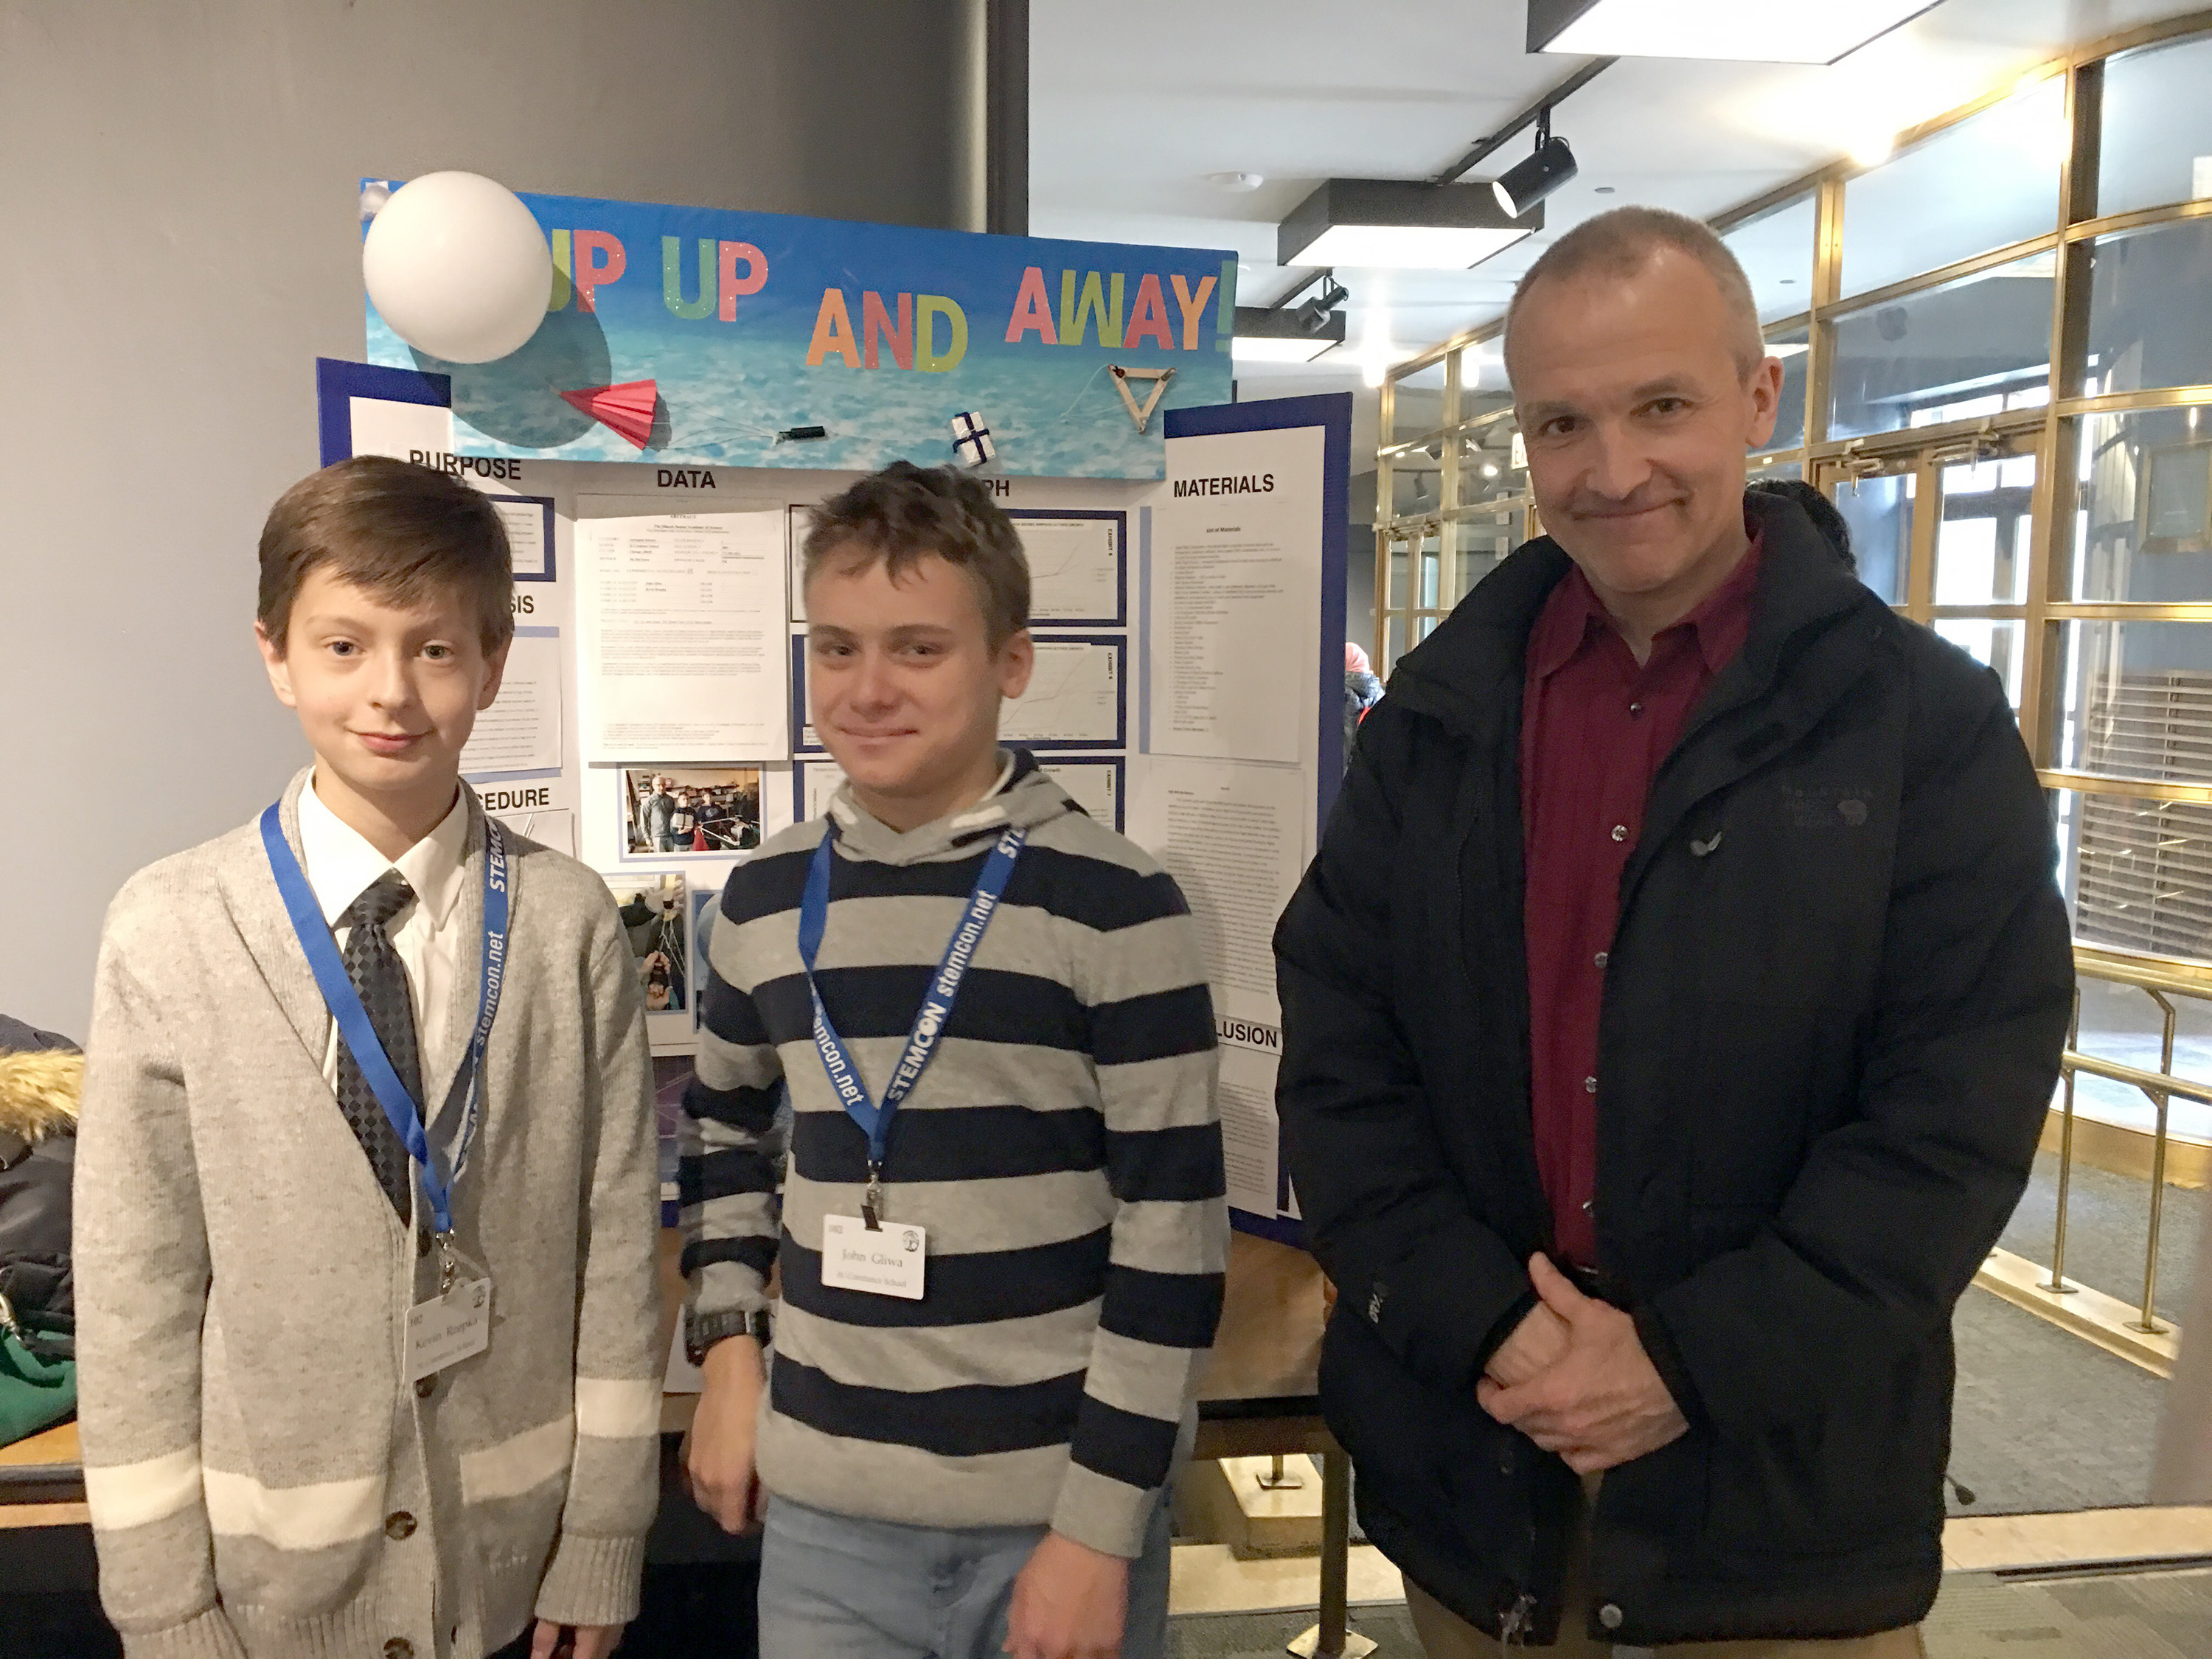 students and professor in front of science fair poster